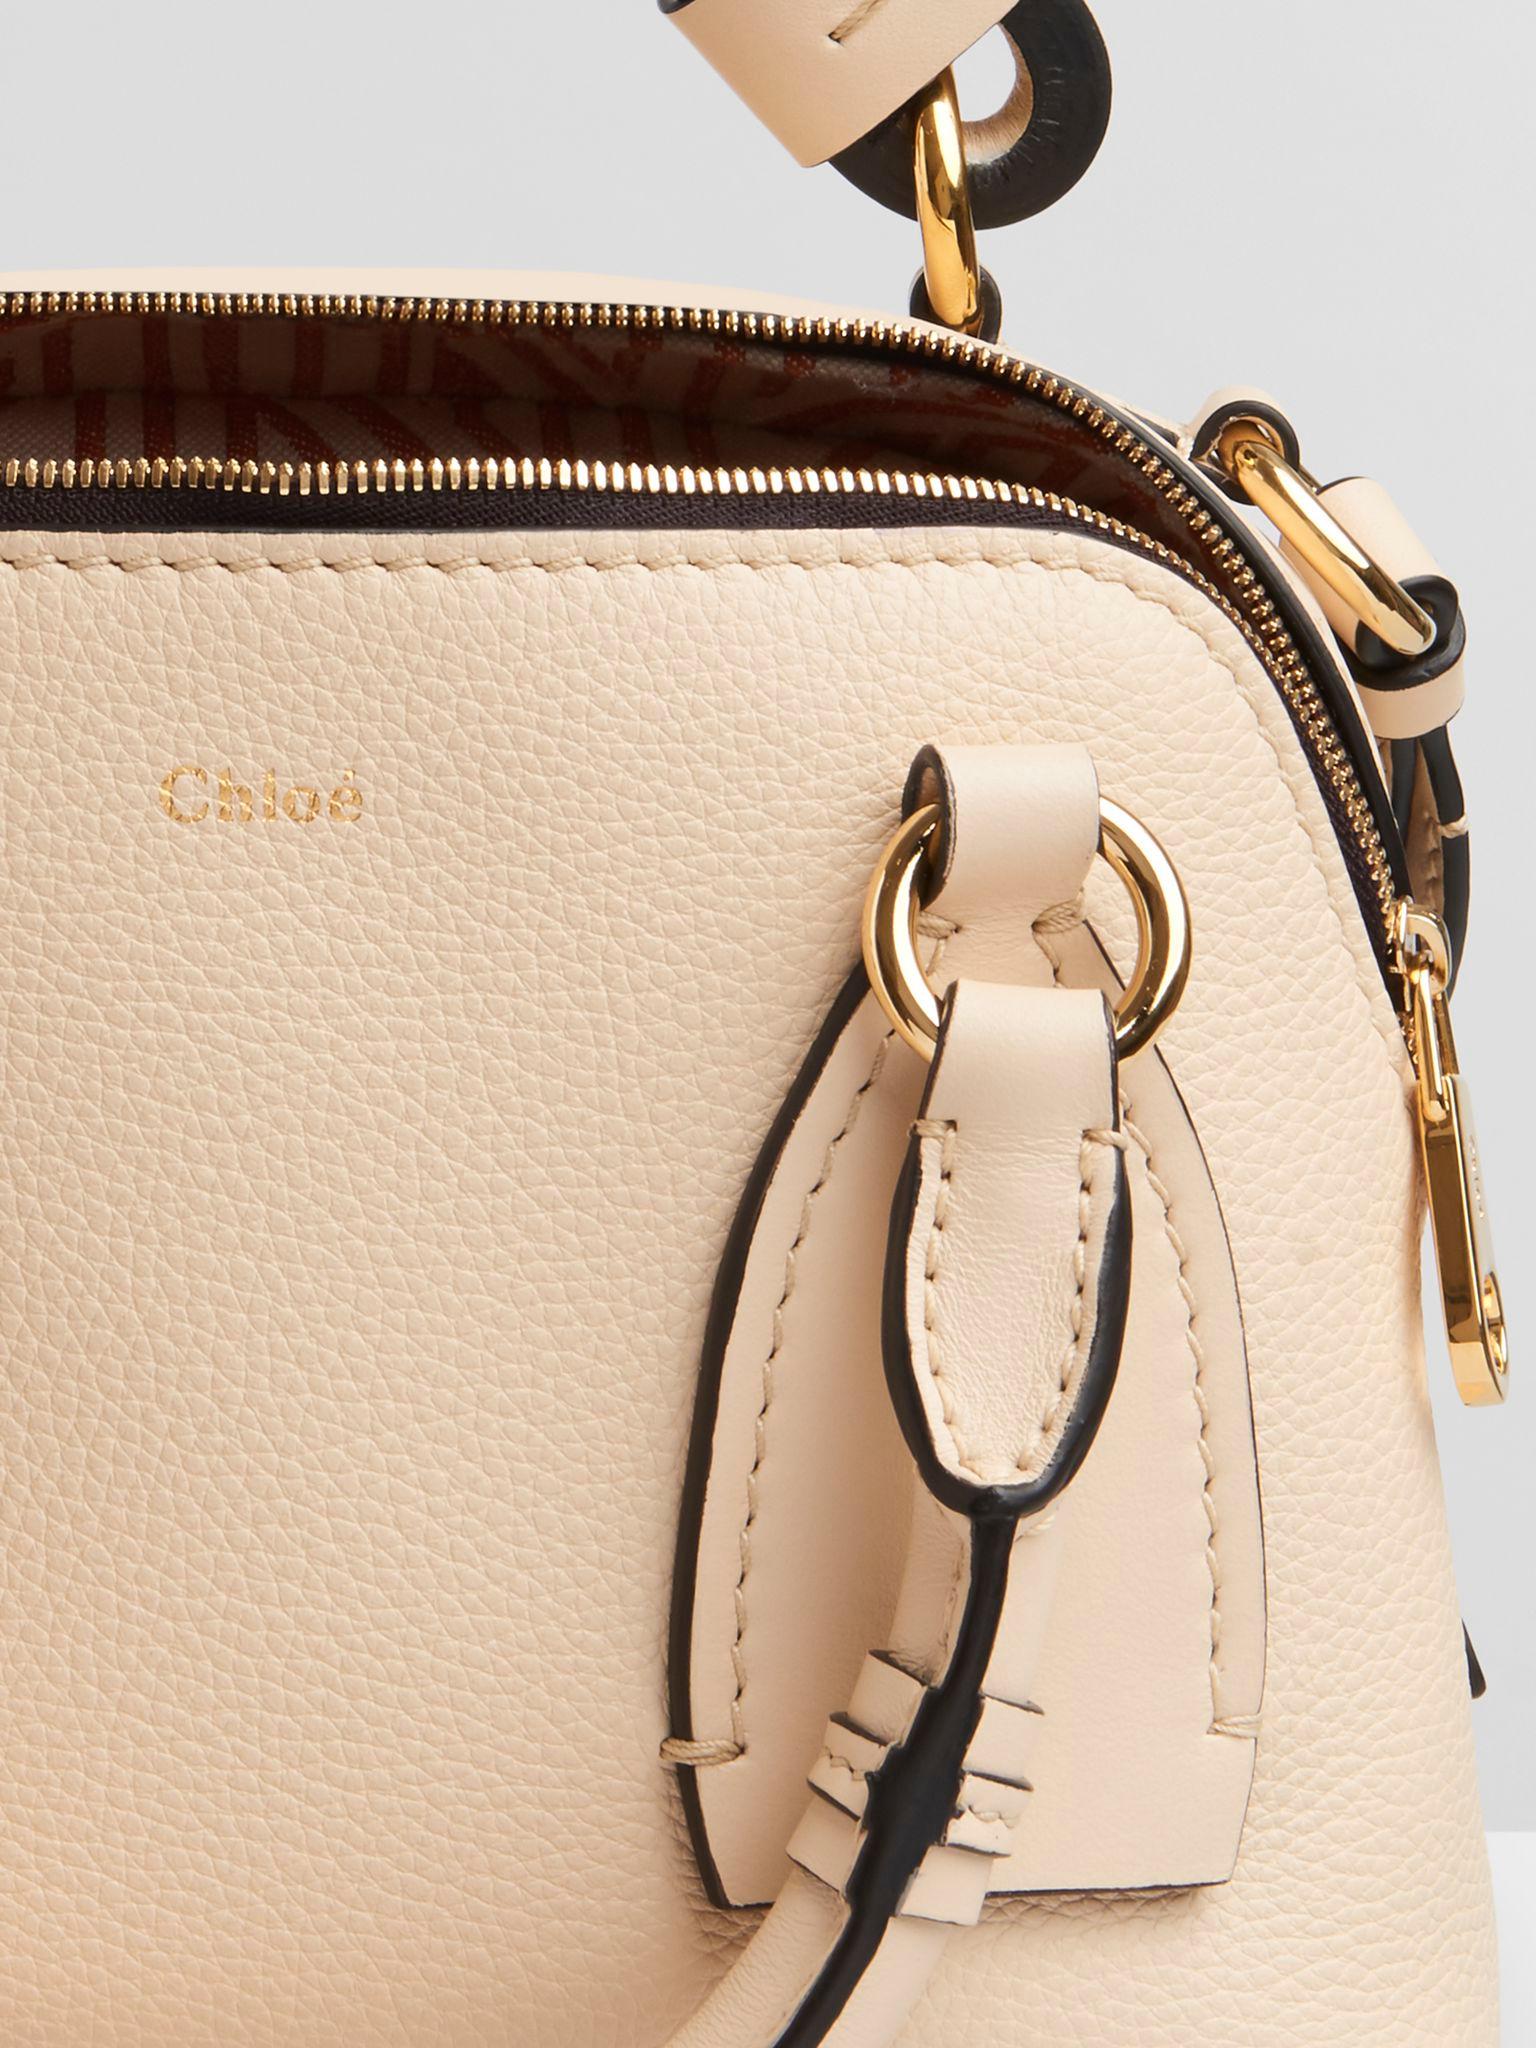 Chloe Sweet Beige Grained & Shiny Calfskin Daria Medium Handbag

- Large zip puller
- Worn on the body, across the body or by hand
- 2 main zipped compartments
- 2 flat inside zipped pockets
- Protective bottom studs
- ChloÃ© cotton jacquard